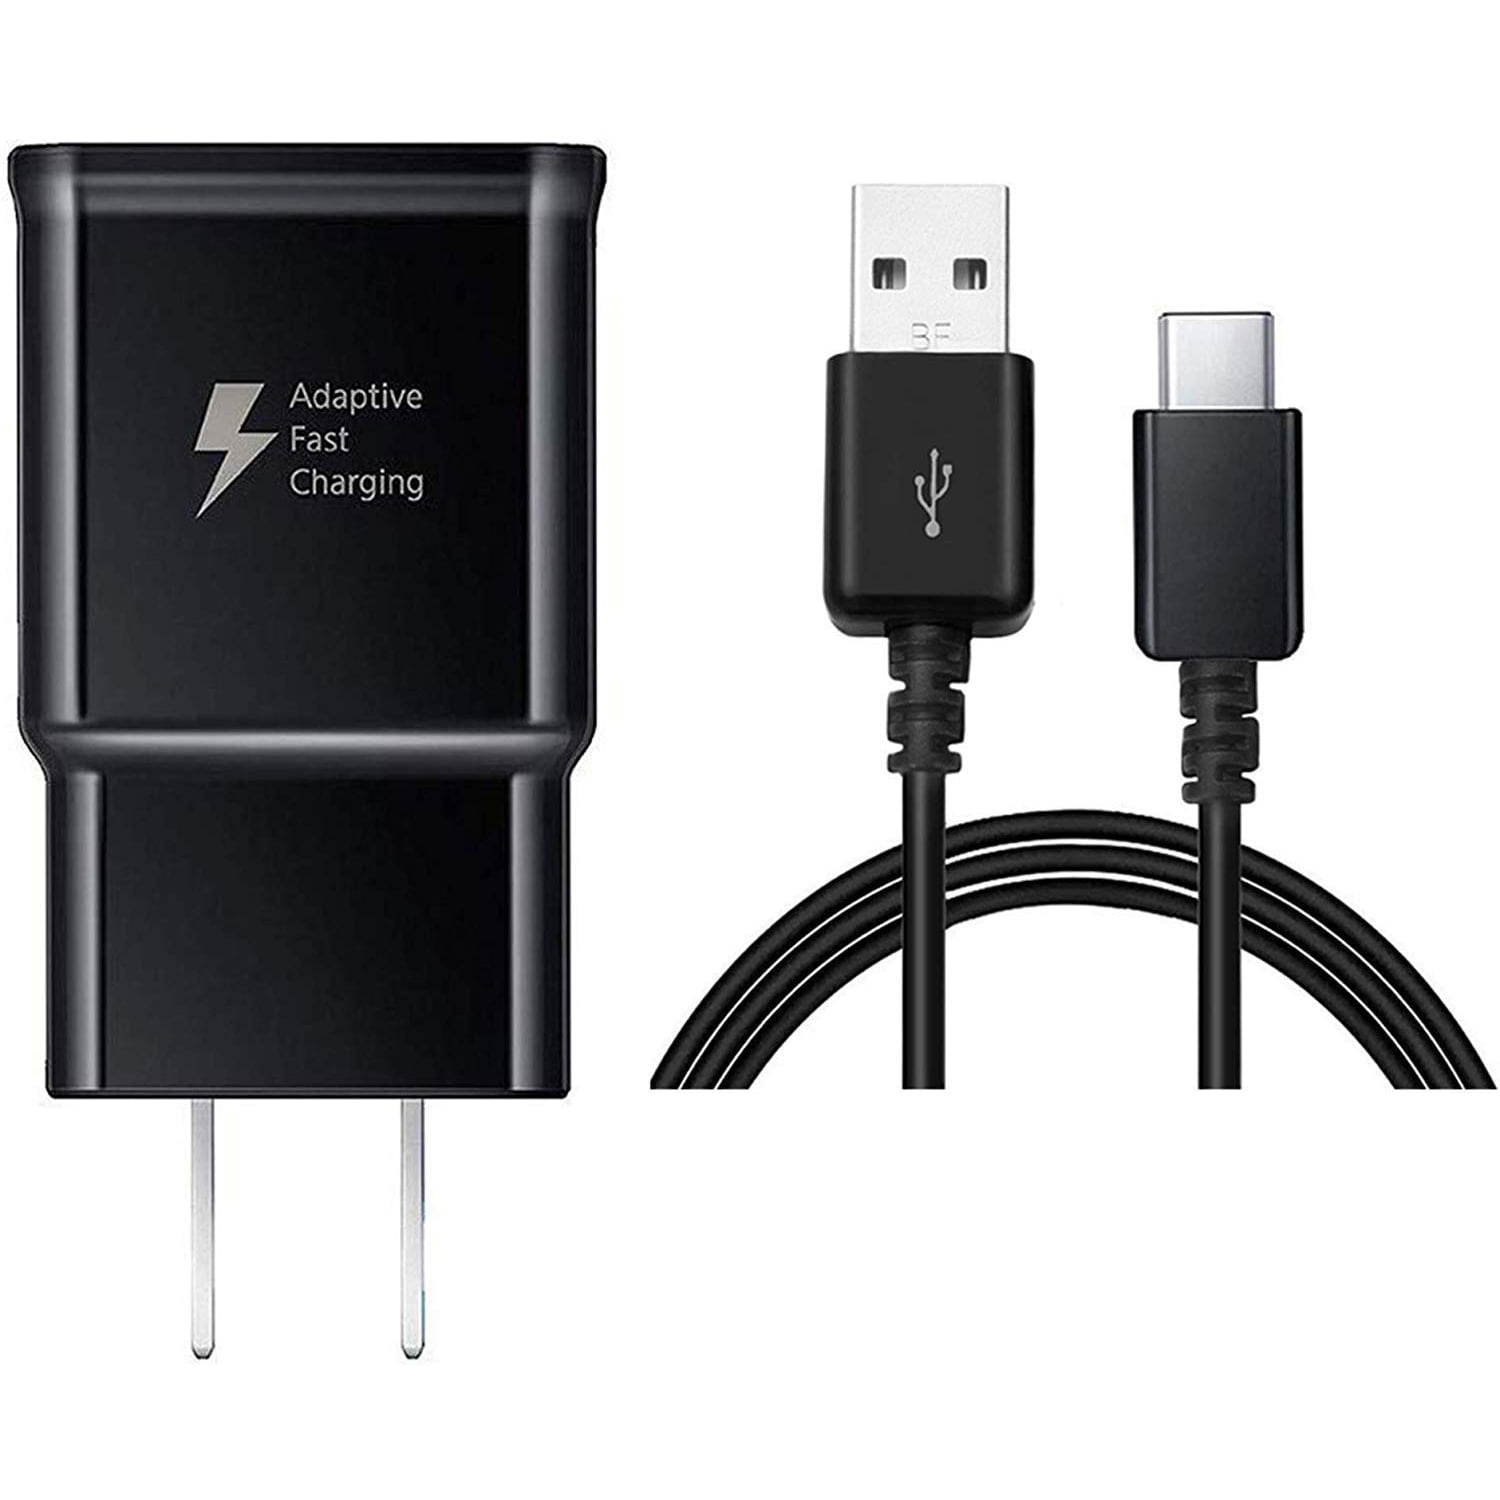 S10e Naztech Elite Series USB-C High-Speed Charge & Sync 4ft Cable Compatible for Samsung Galaxy S20 Note 10 Note 9 Note 8 S8 S8+ S9+ Gold S10 Google Pixel & More S10+ S9 